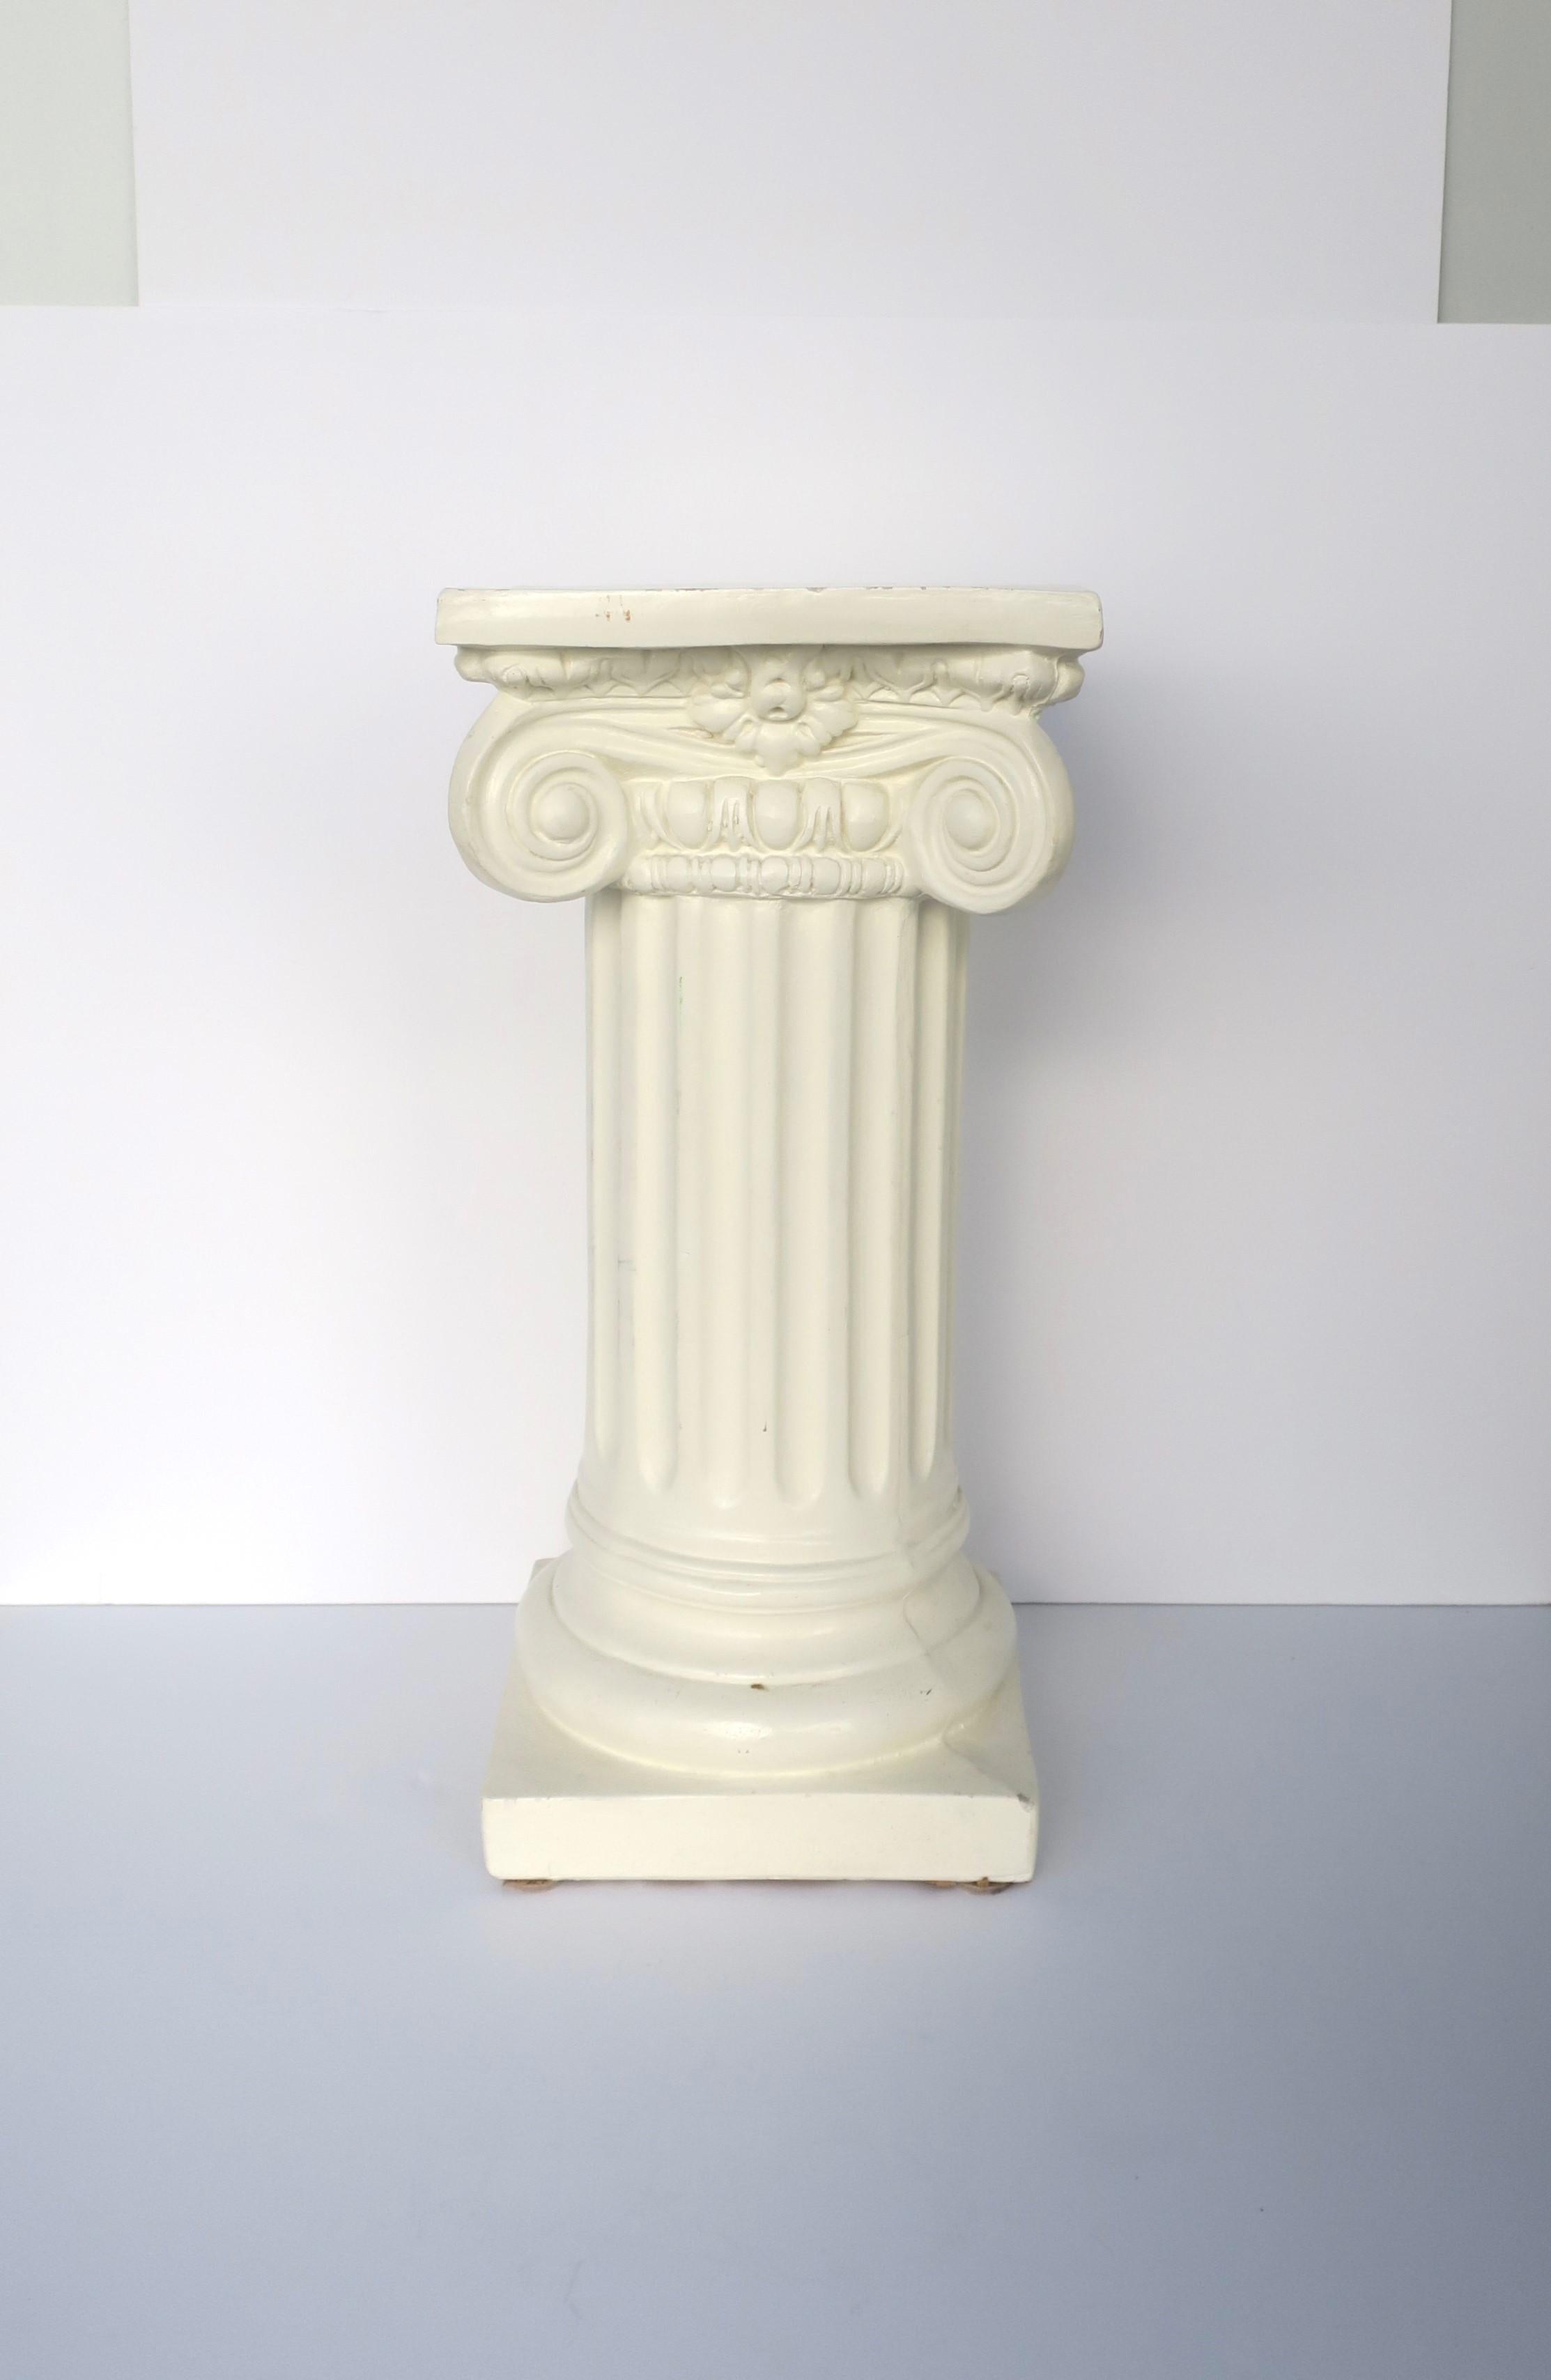 A glazed plaster Grecian Ionic order column pedestal stand in the Neoclassical style, circa mid to late-20th century. Piece is an off-white glazed plaster. A great piece for a sculpture, plant, books, light/lamp (shown with books and globe light),